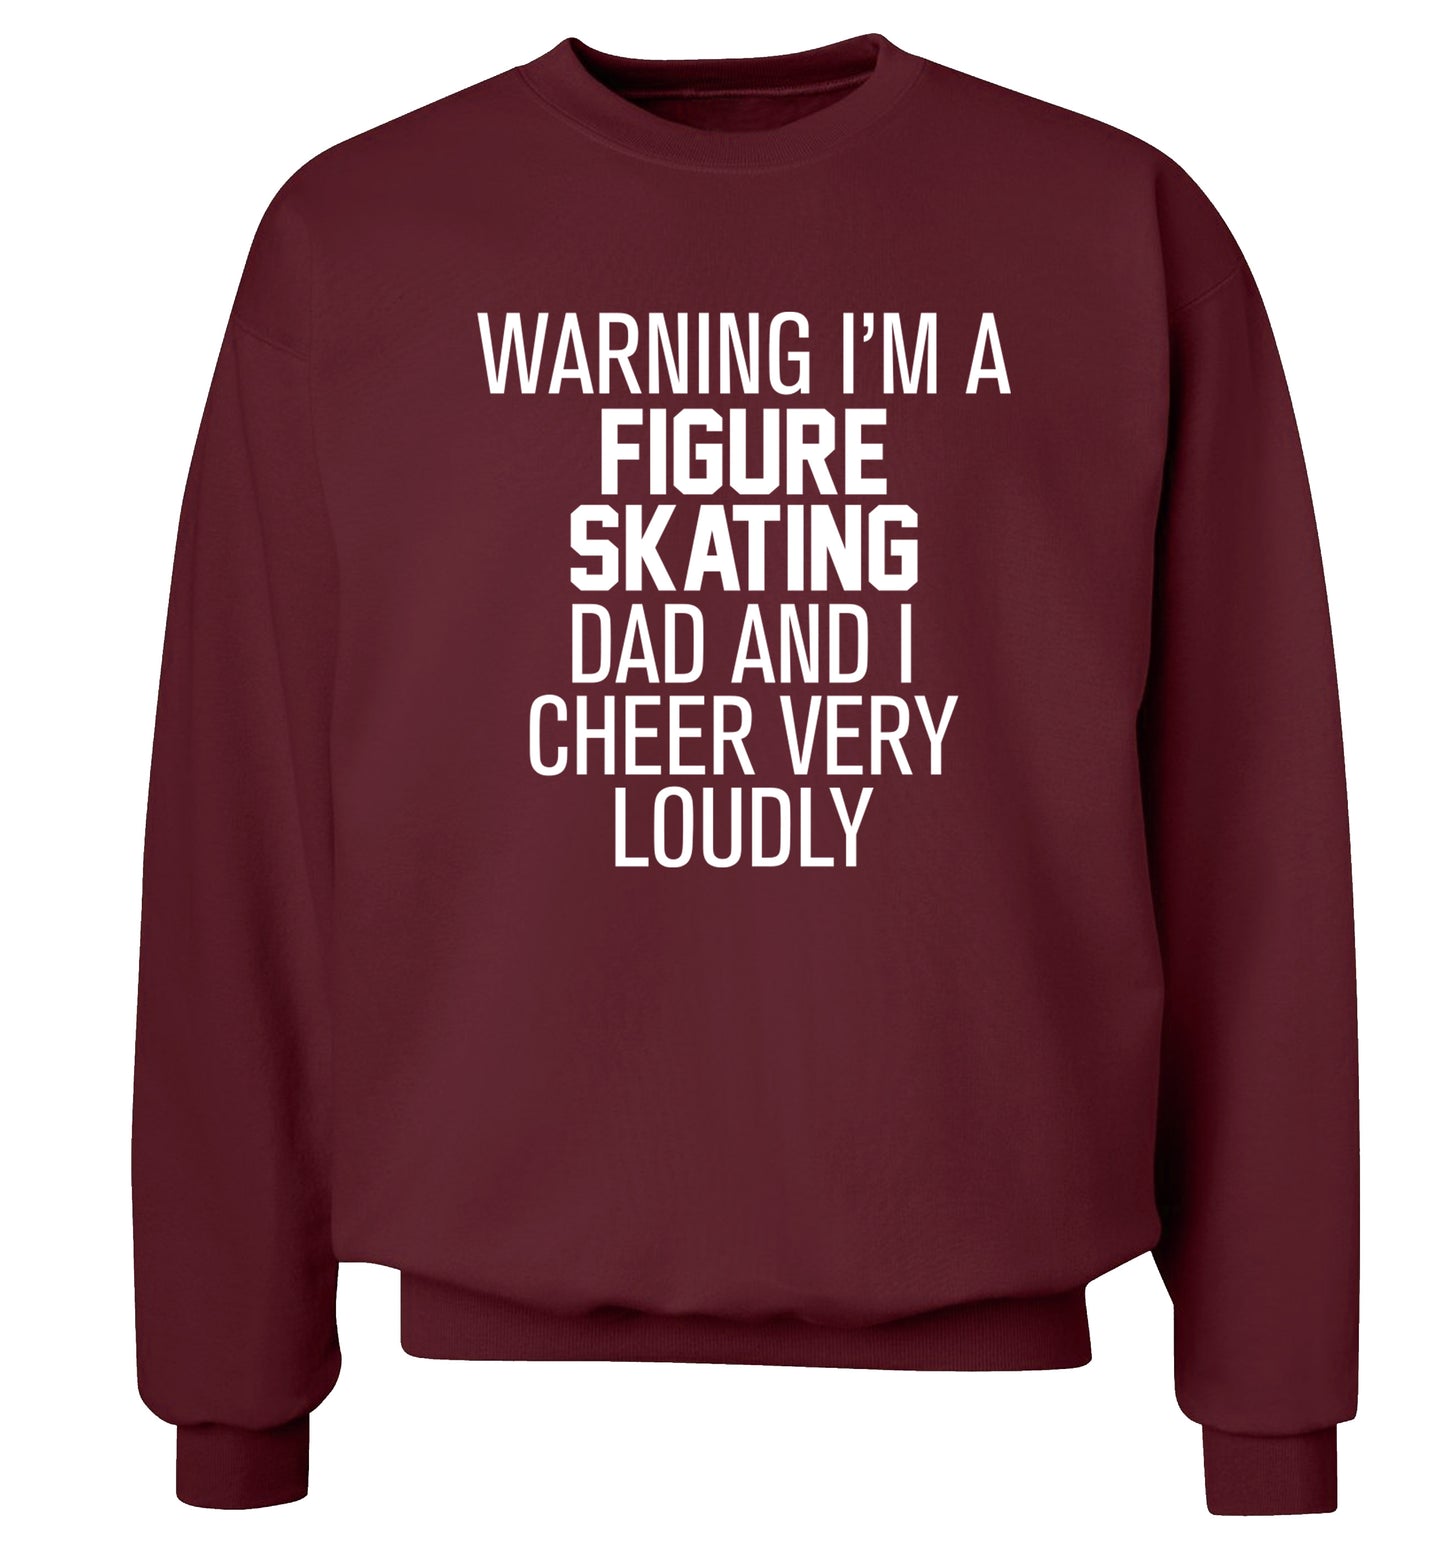 Warning I'm a figure skating dad and I cheer very loudly Adult's unisexmaroon Sweater 2XL